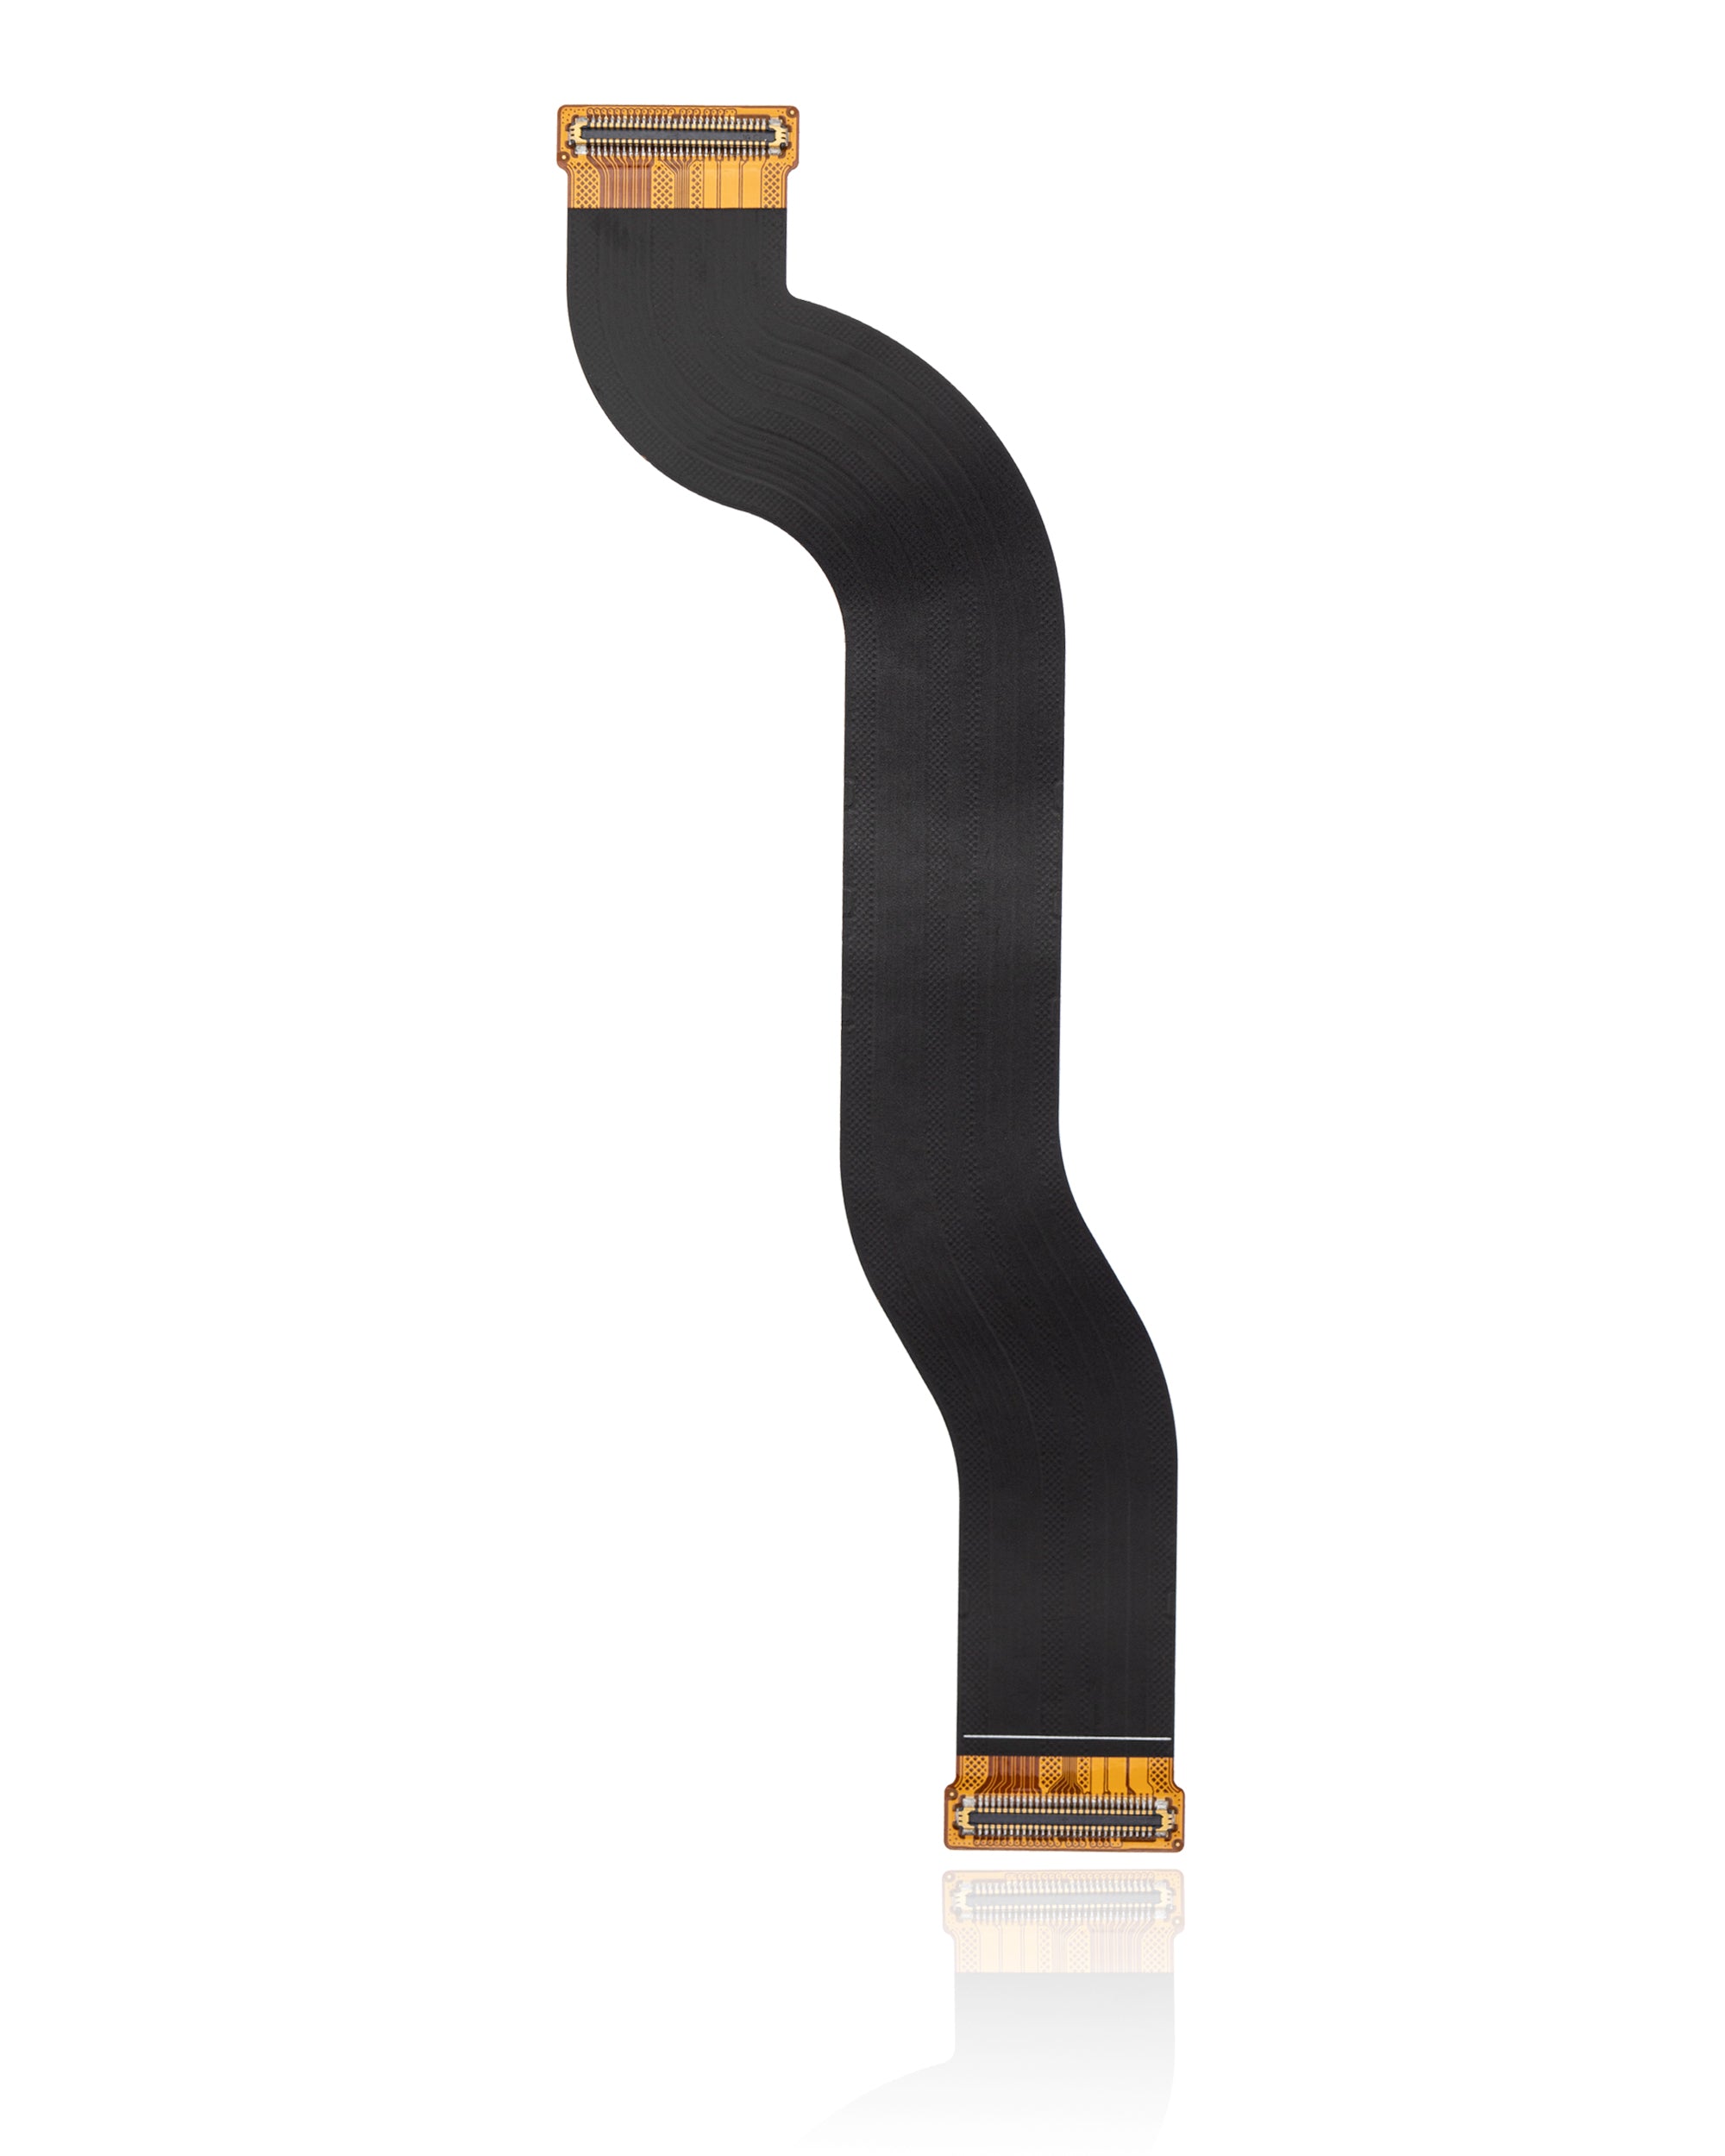 For Samsung Galaxy S21 Plus 5G LCD Flex Cable Replacement